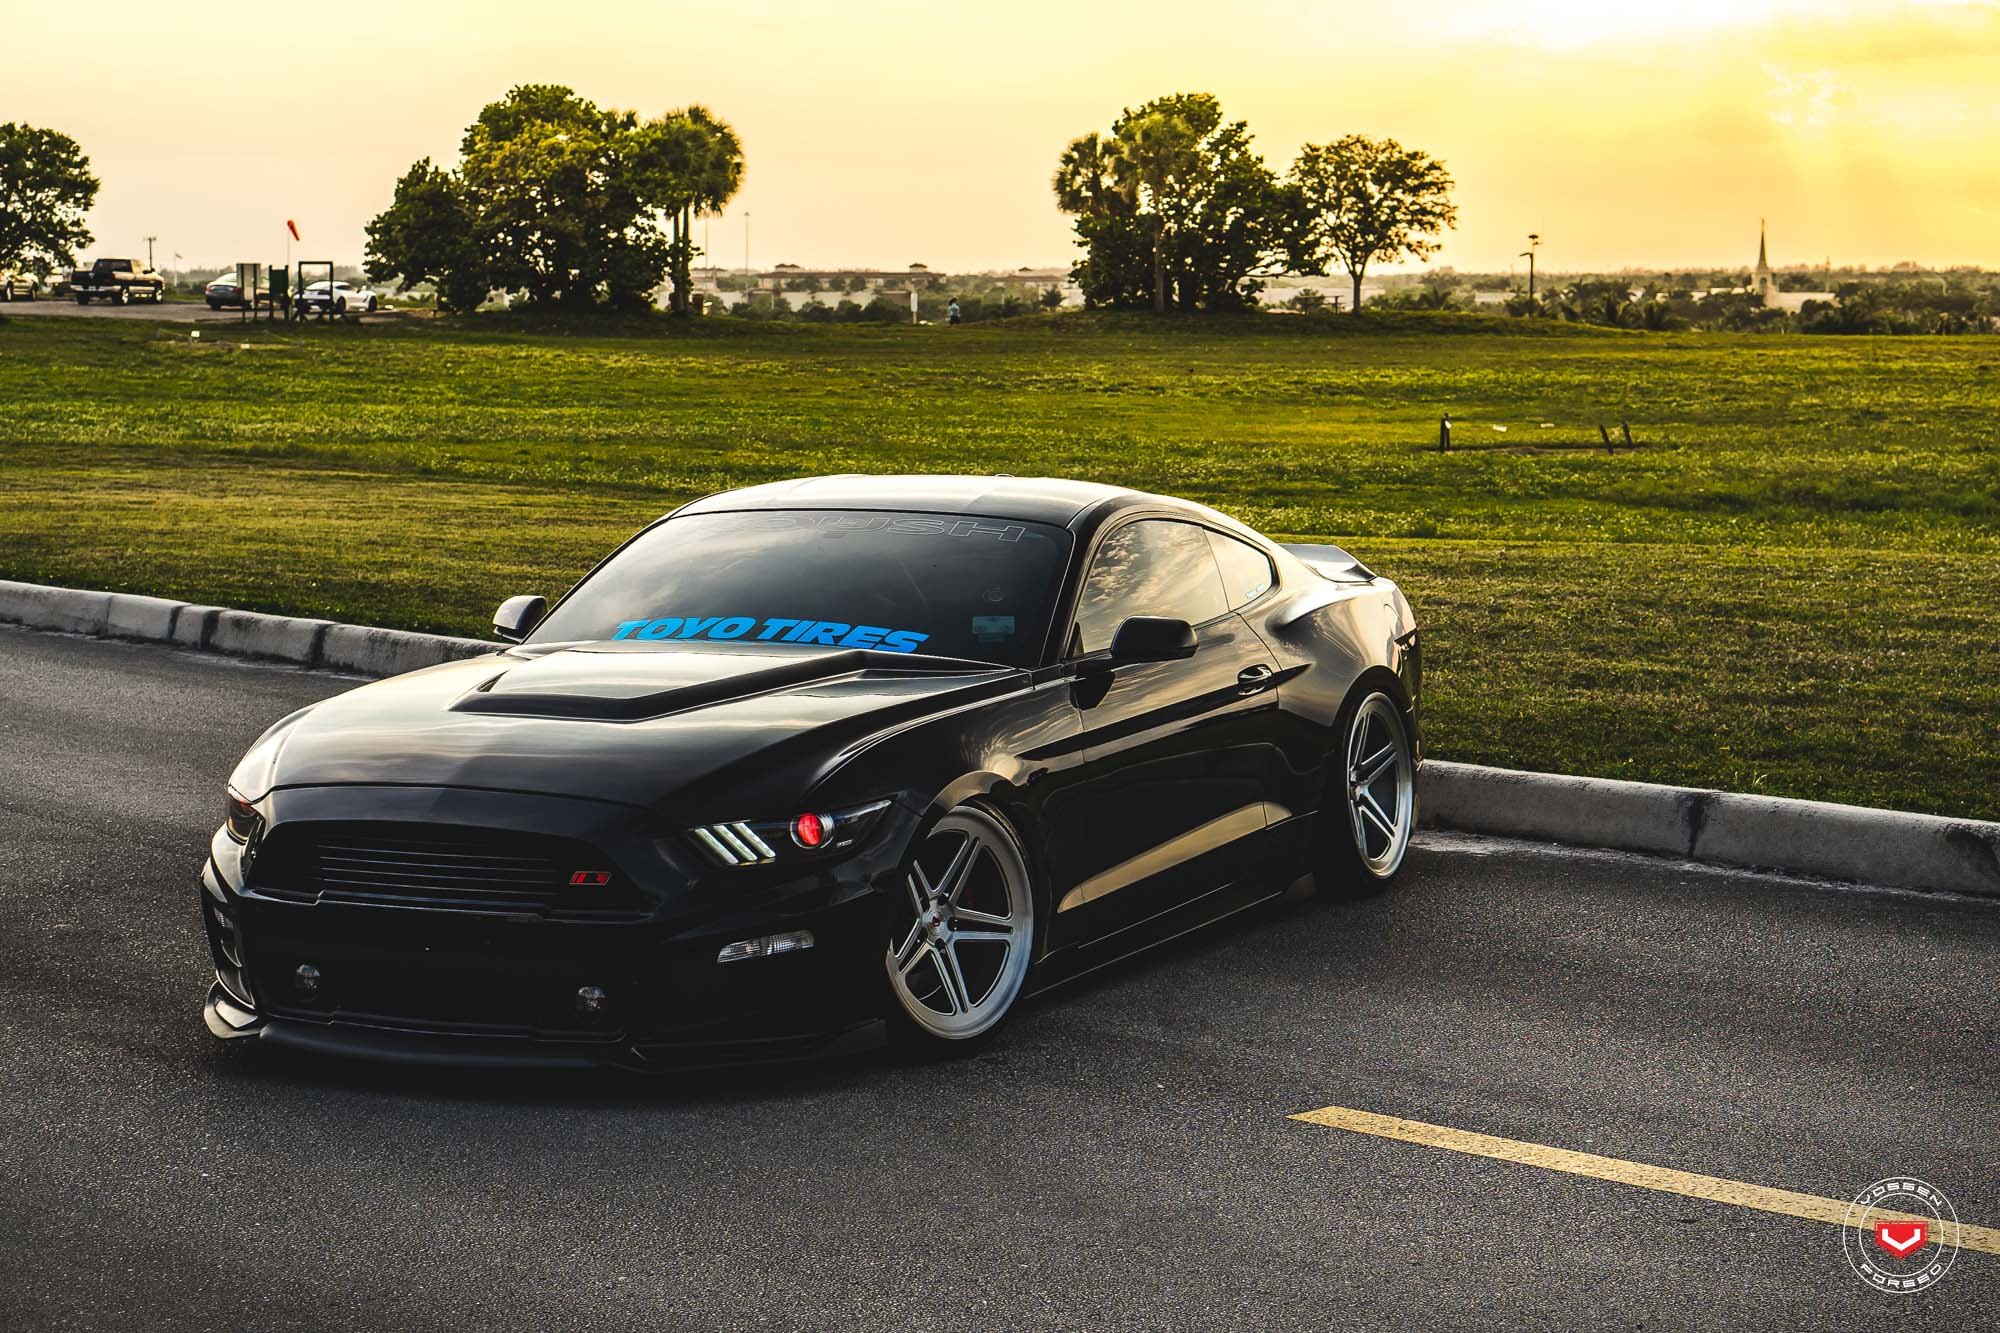 Ford Mustang Stanced On Vossen Forged Wheels - Photo by Vossen.